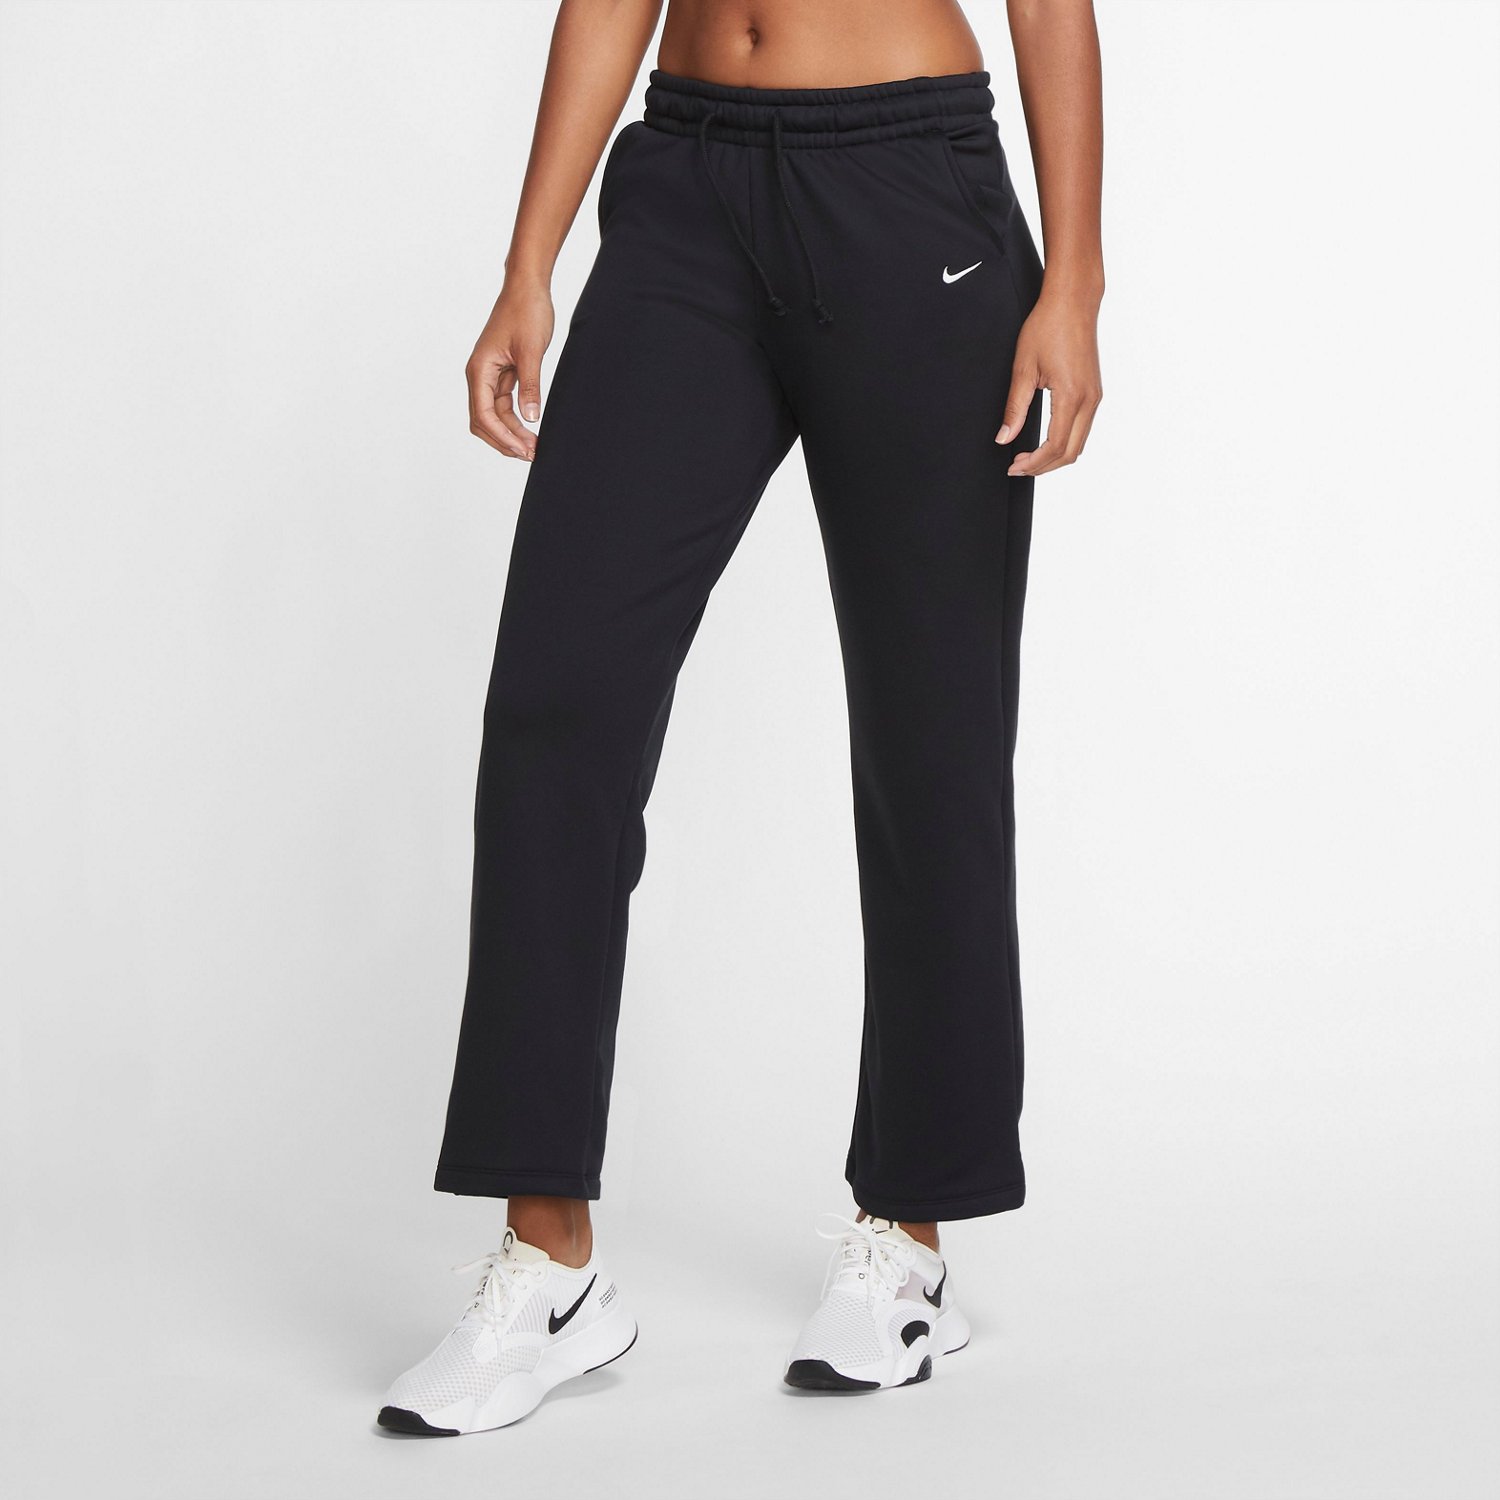 Skærm pumpe Forløber Nike Women's Therma Dri-FIT All Time Classic Training Pants | Academy